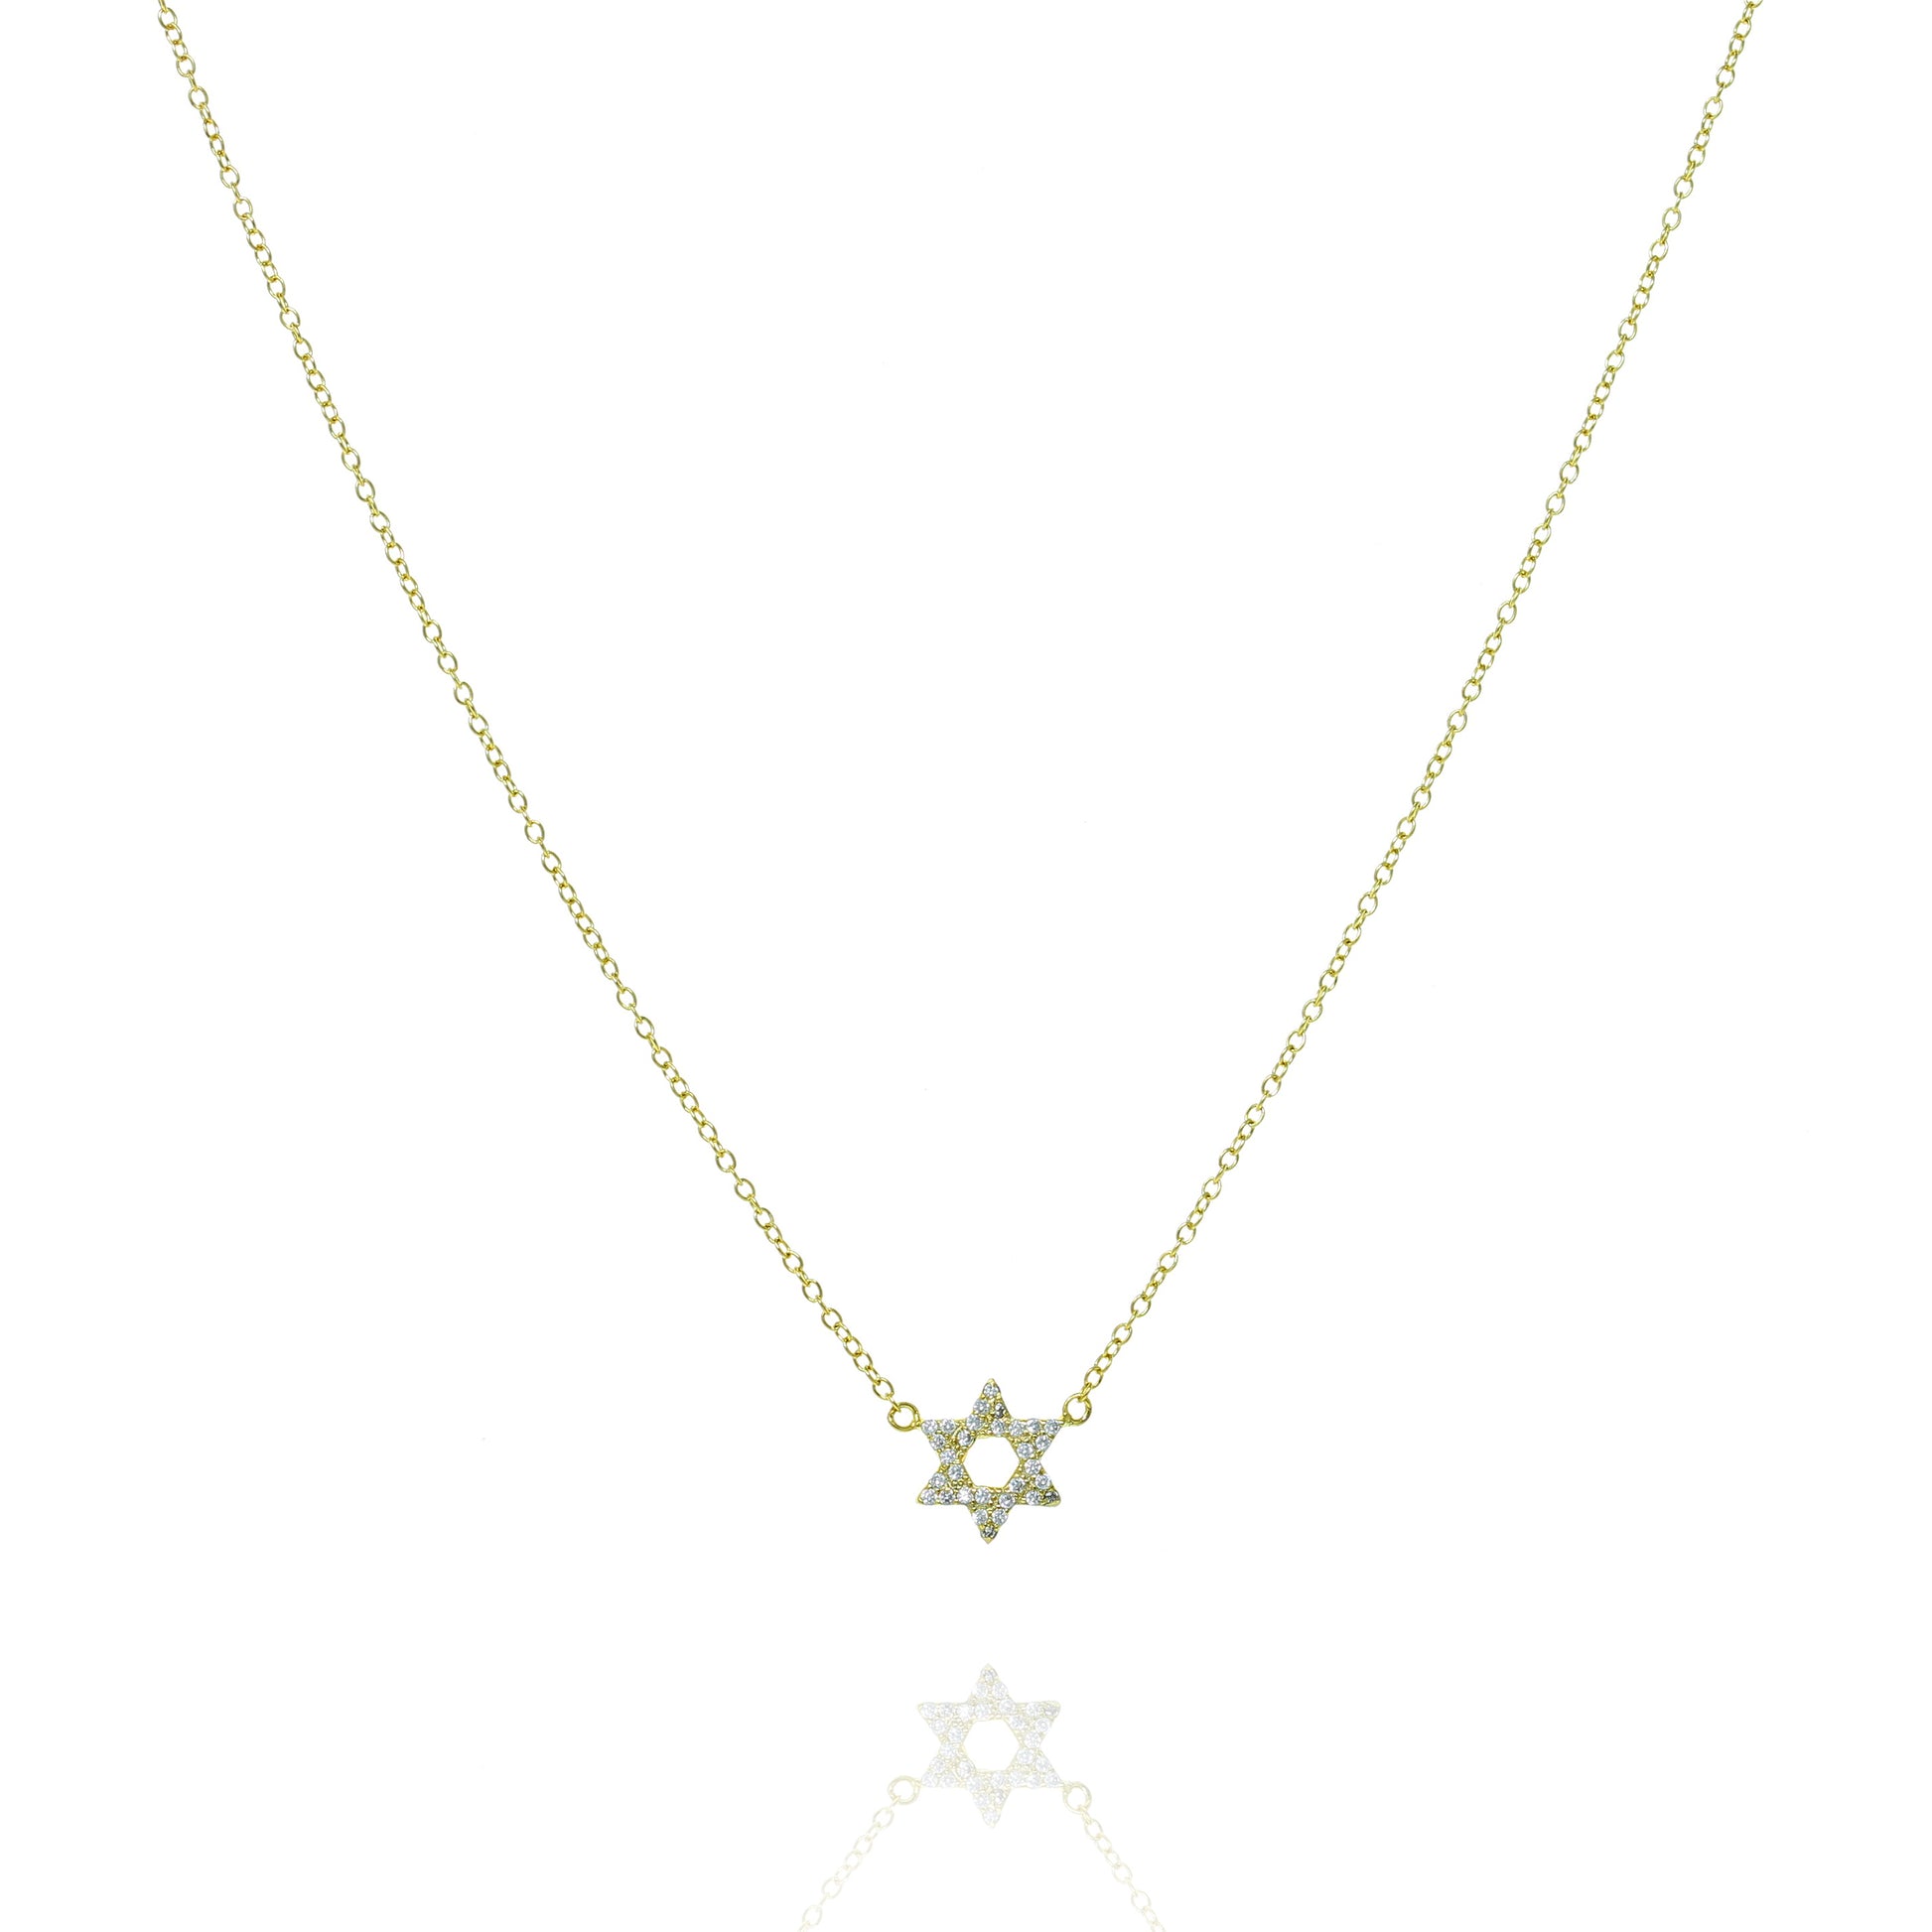 
Gold-plated silver necklace with pavé Star of David pendant on delicate chain

